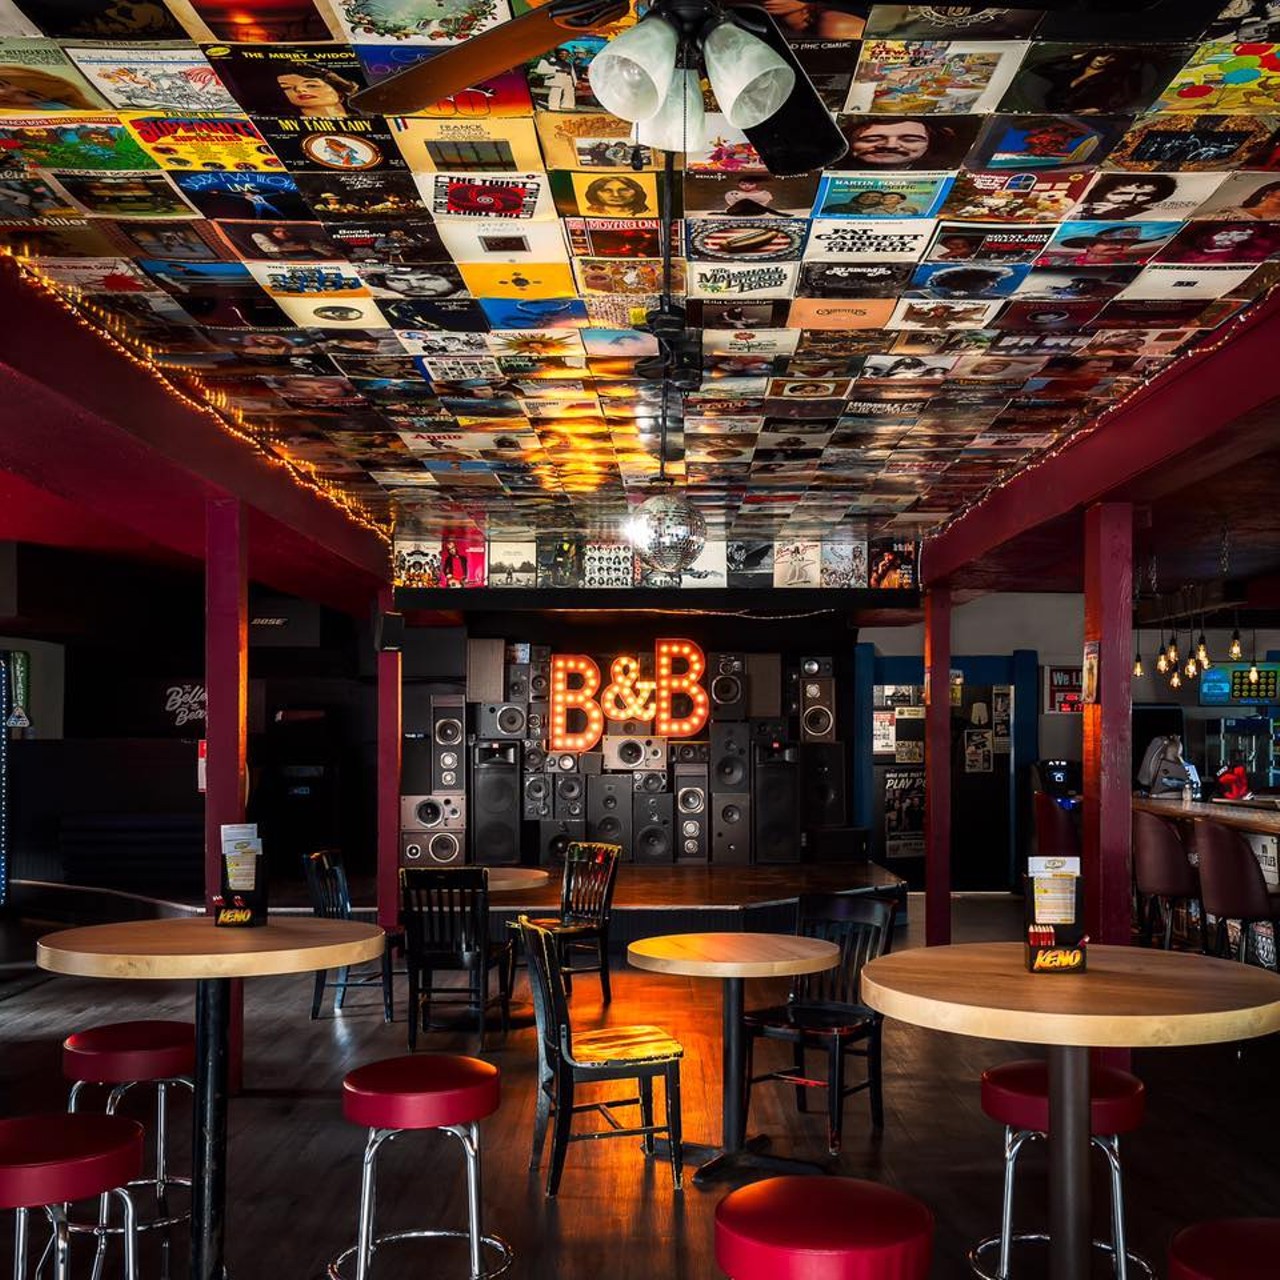 No. 3 Best Overall Bar/Club: The Belle and the Bear
8512 Market Place Lane, Montgomery